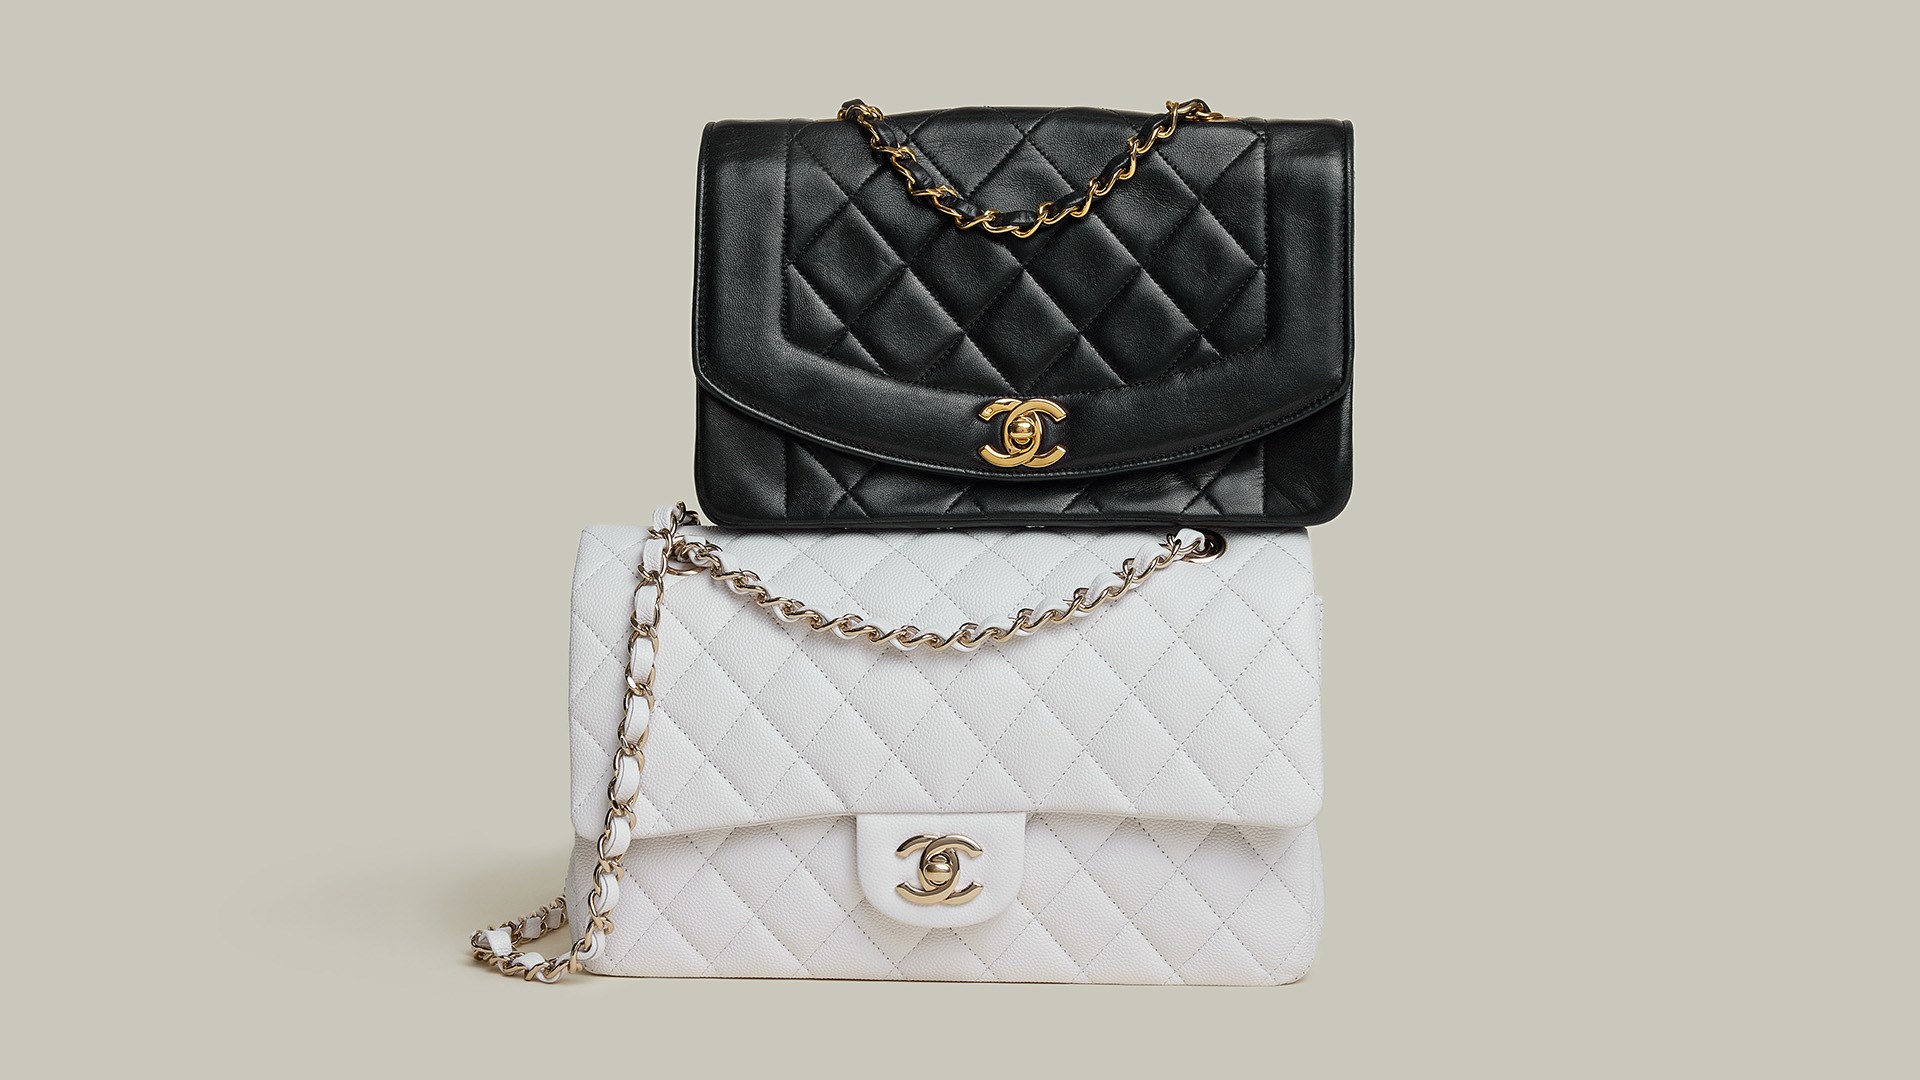 The History of the Chanel 19 Bag - luxfy